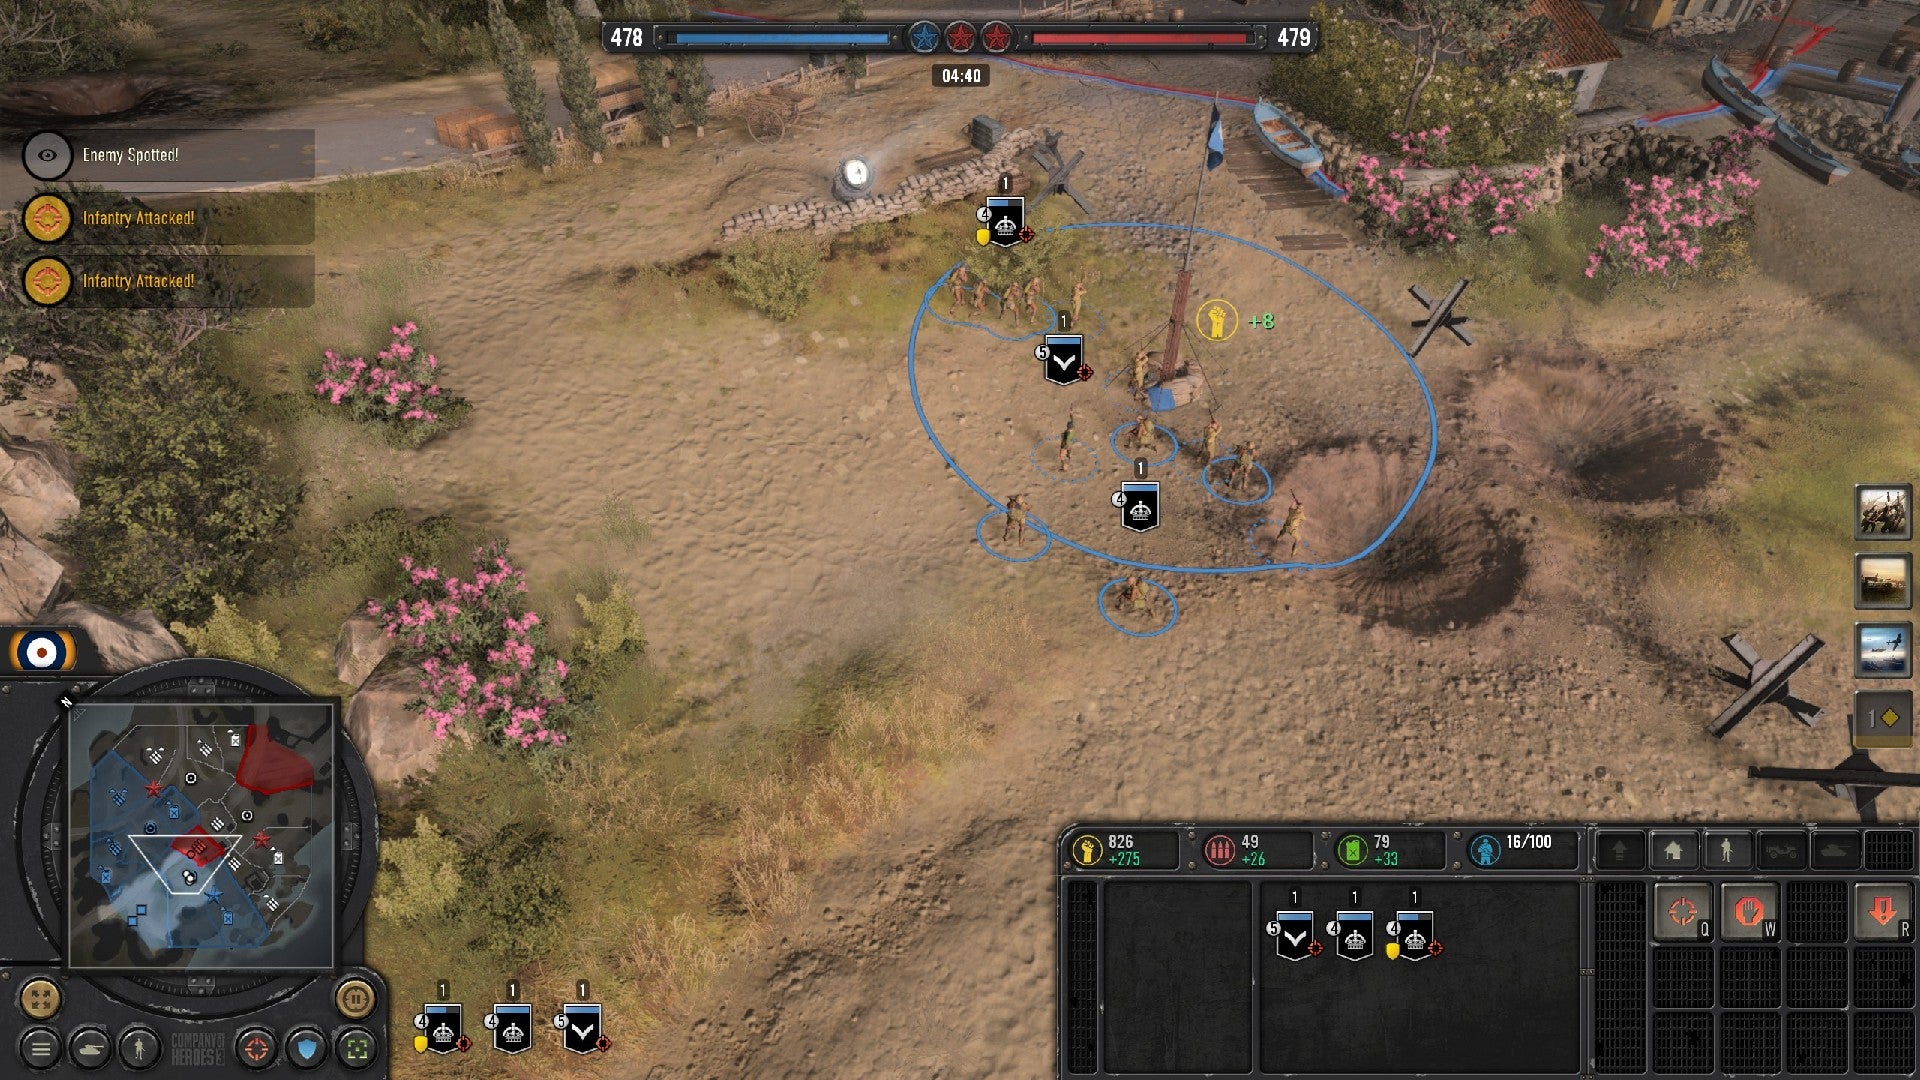 Company of Heroes 3 image showing a group of units selected together.